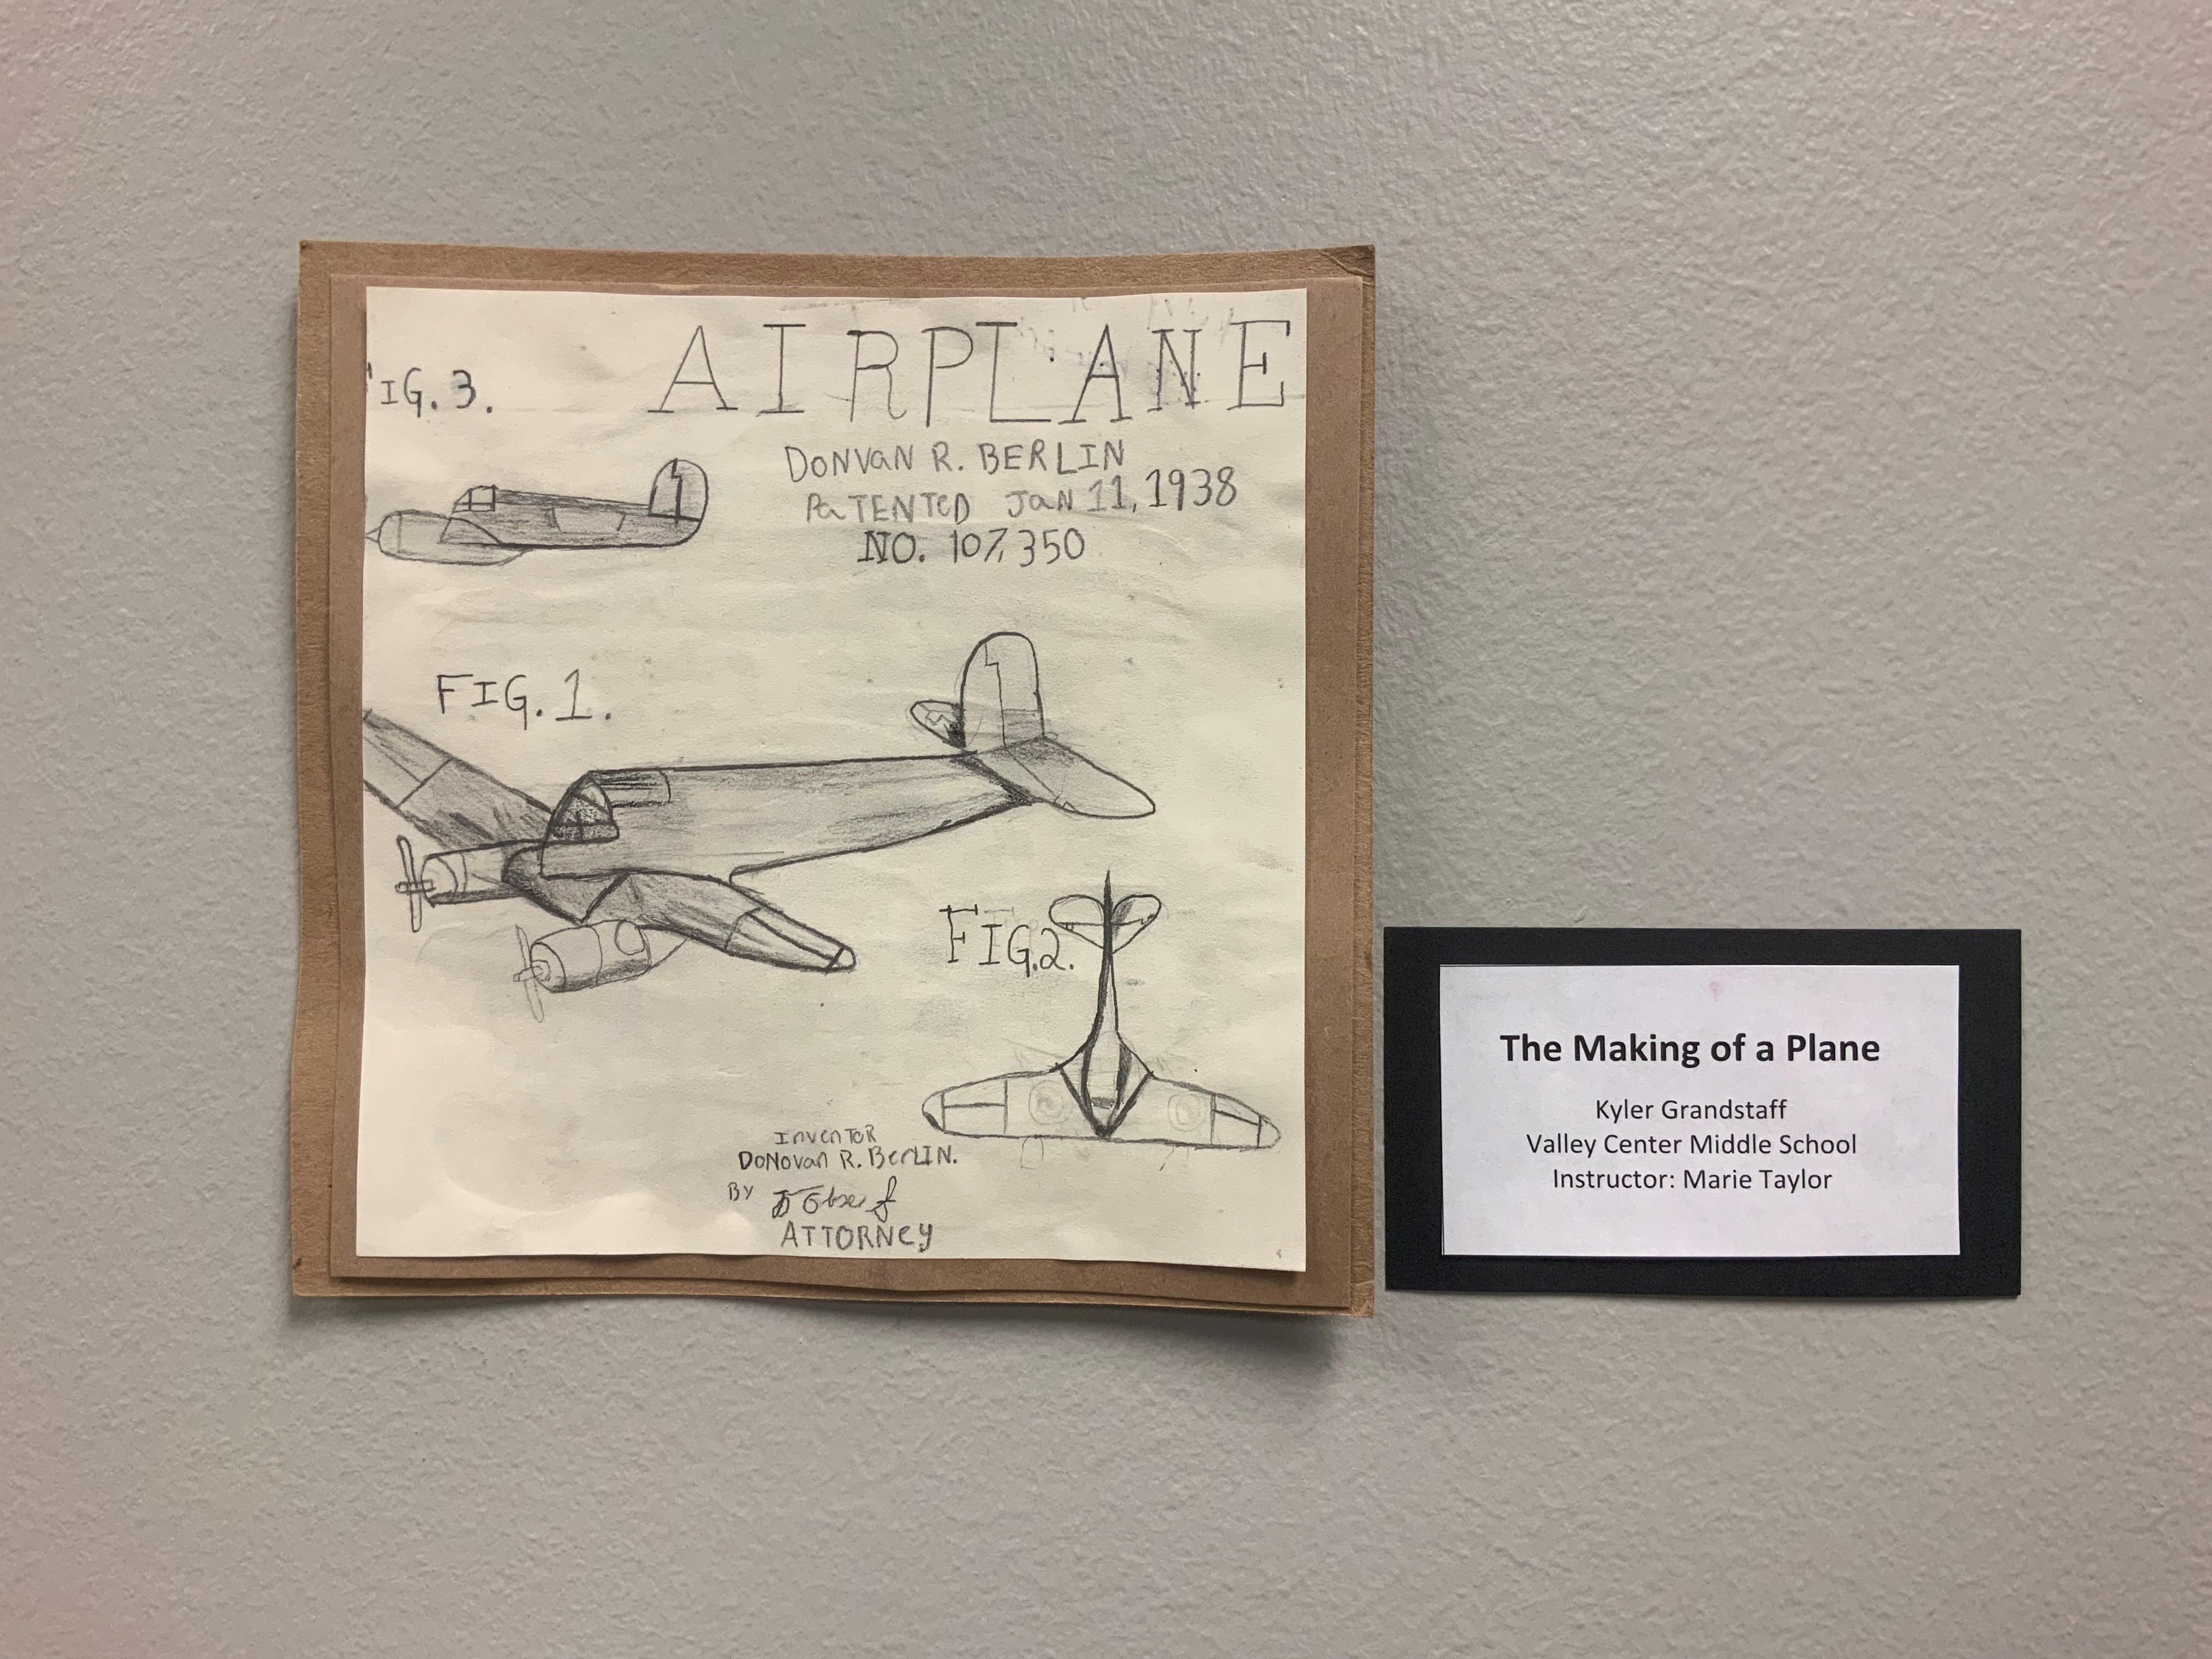 The Making Of A Plane by Kyler Grandstaff